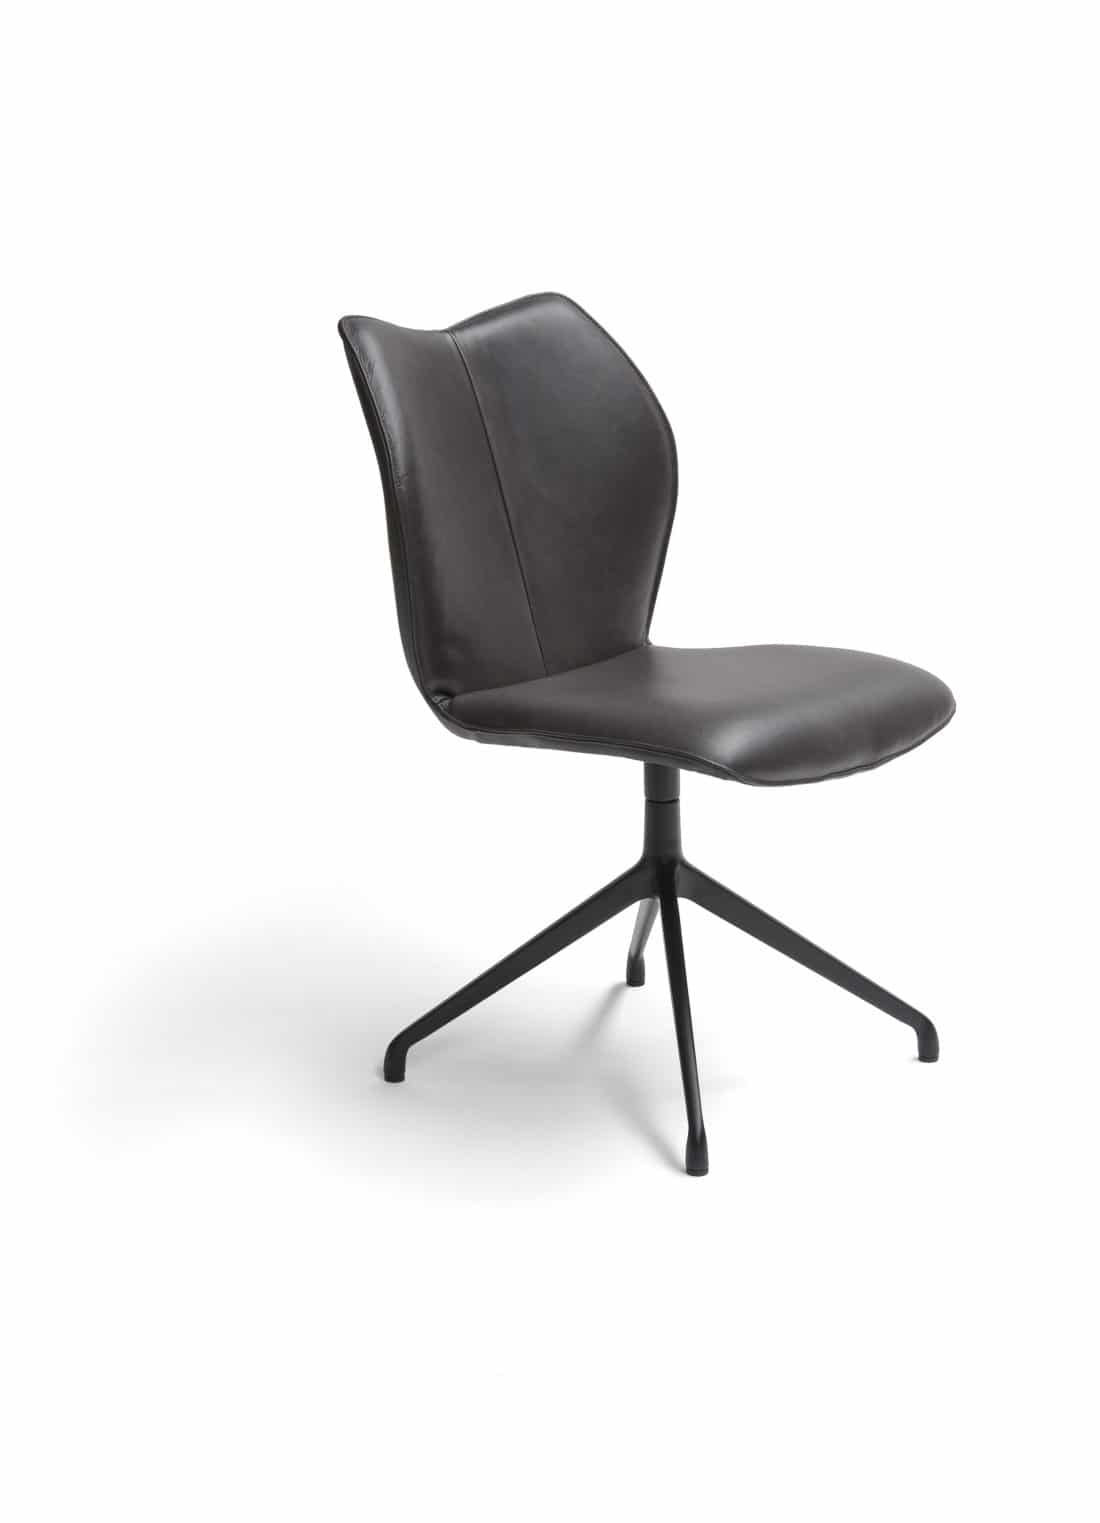 Kiq Swivel Dining Chair Without Armrests Black Legs Brown Leather Scaled